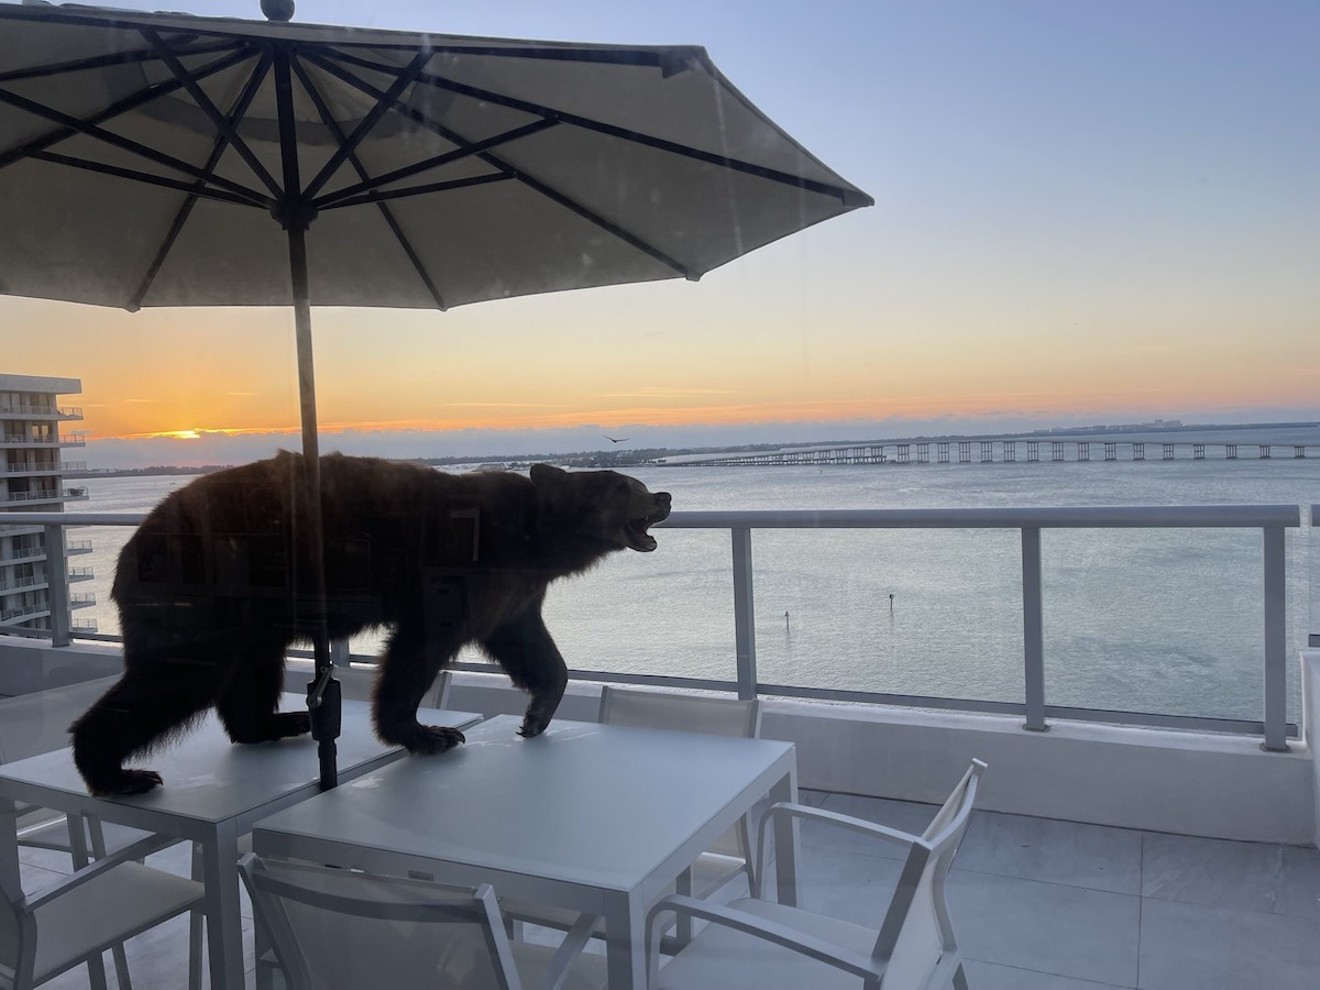 Alex Roy put a taxidermied American black bear on top of his patio furniture in mid-February.